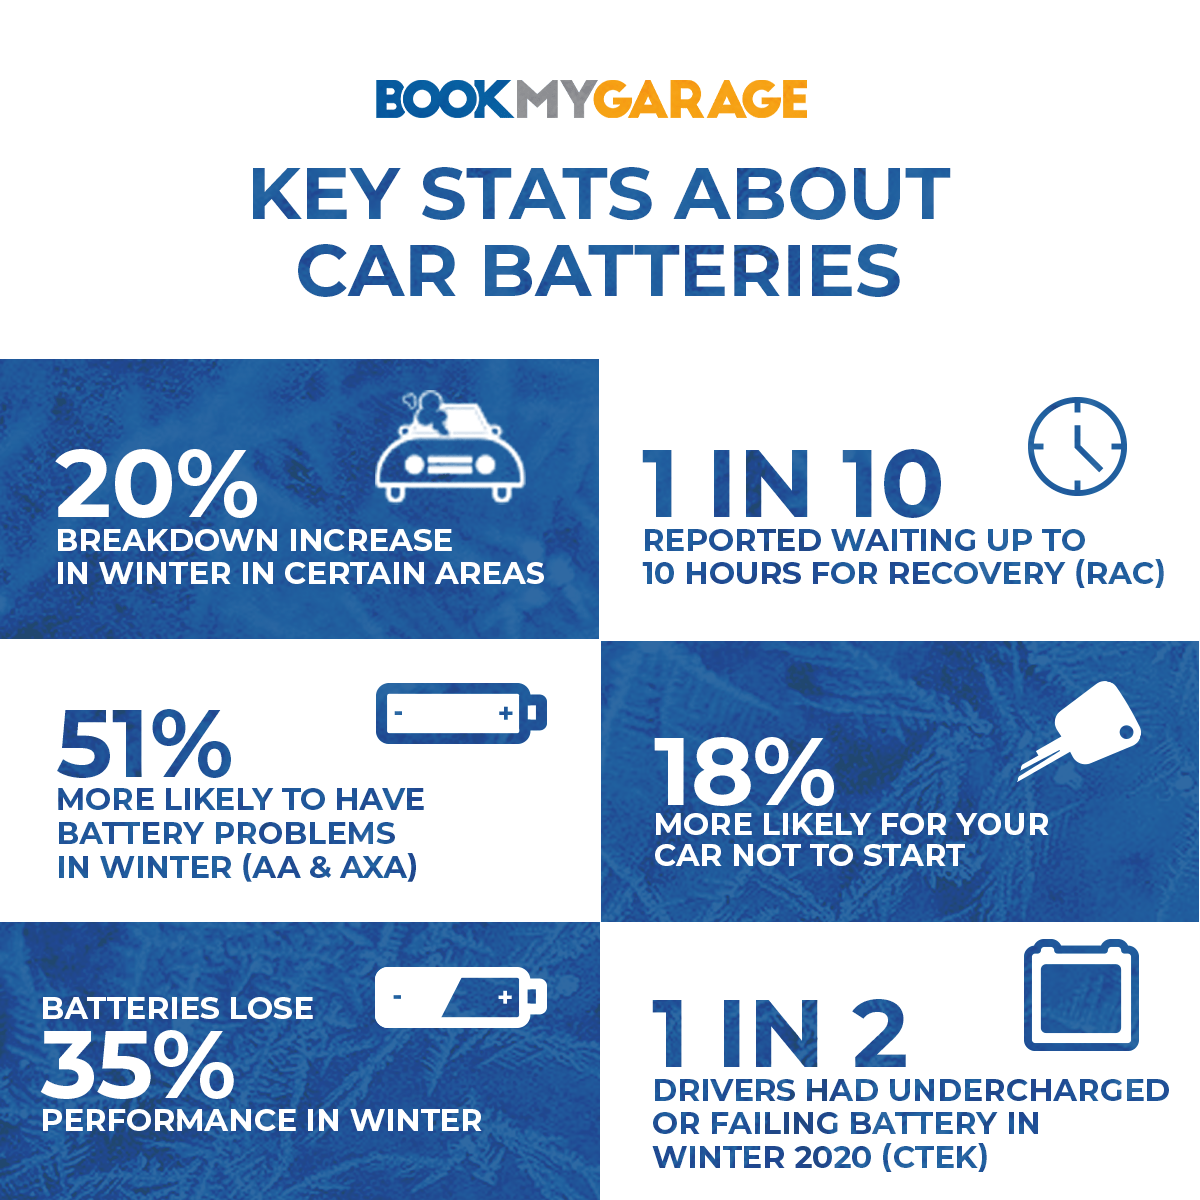 The Ultimate Guide to Car Batteries